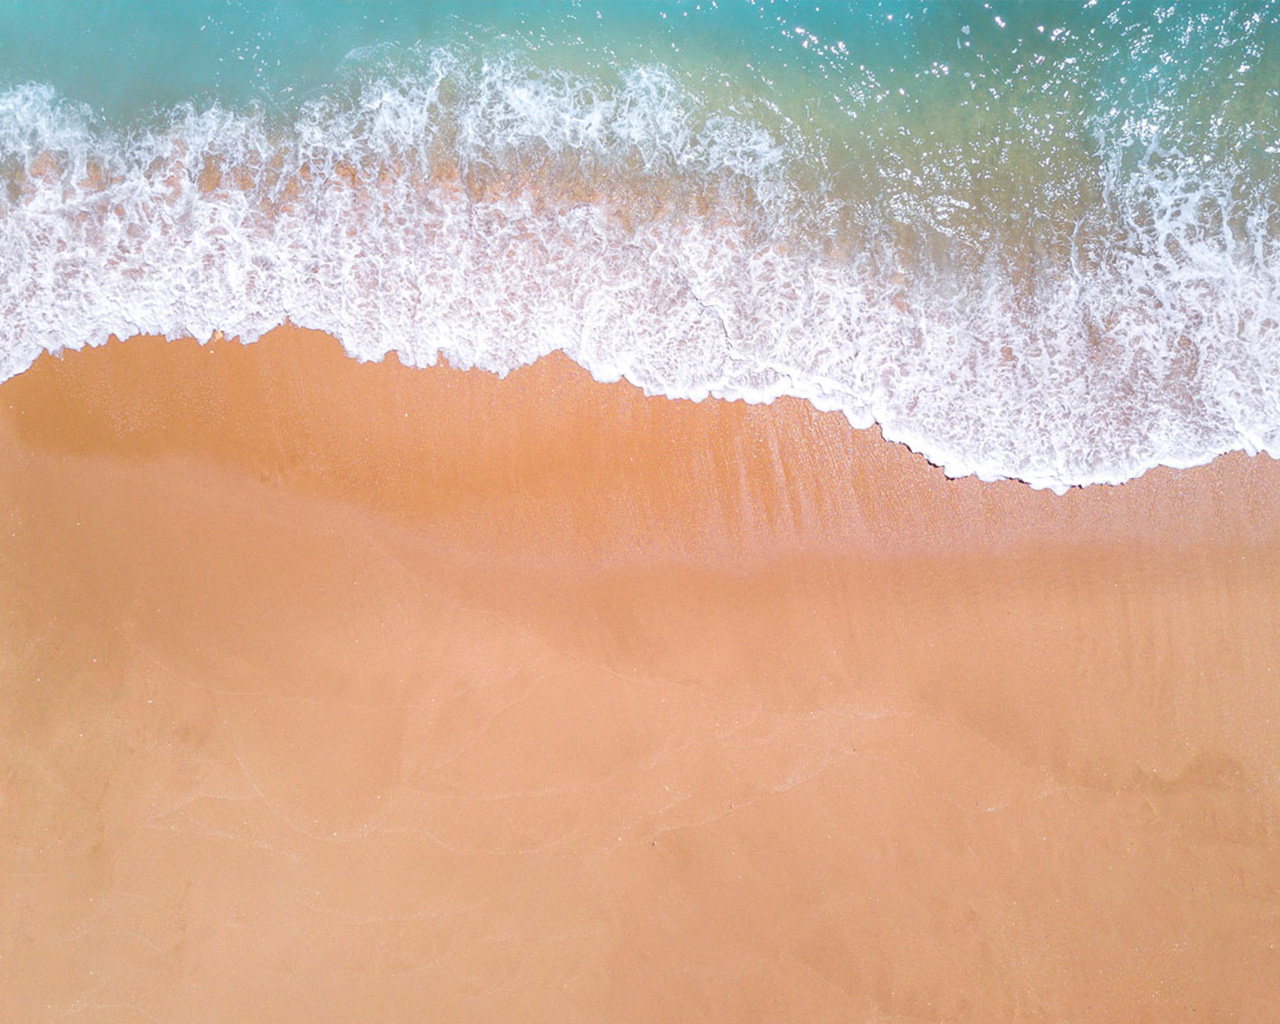 Top view of a wave breaking onto the sand